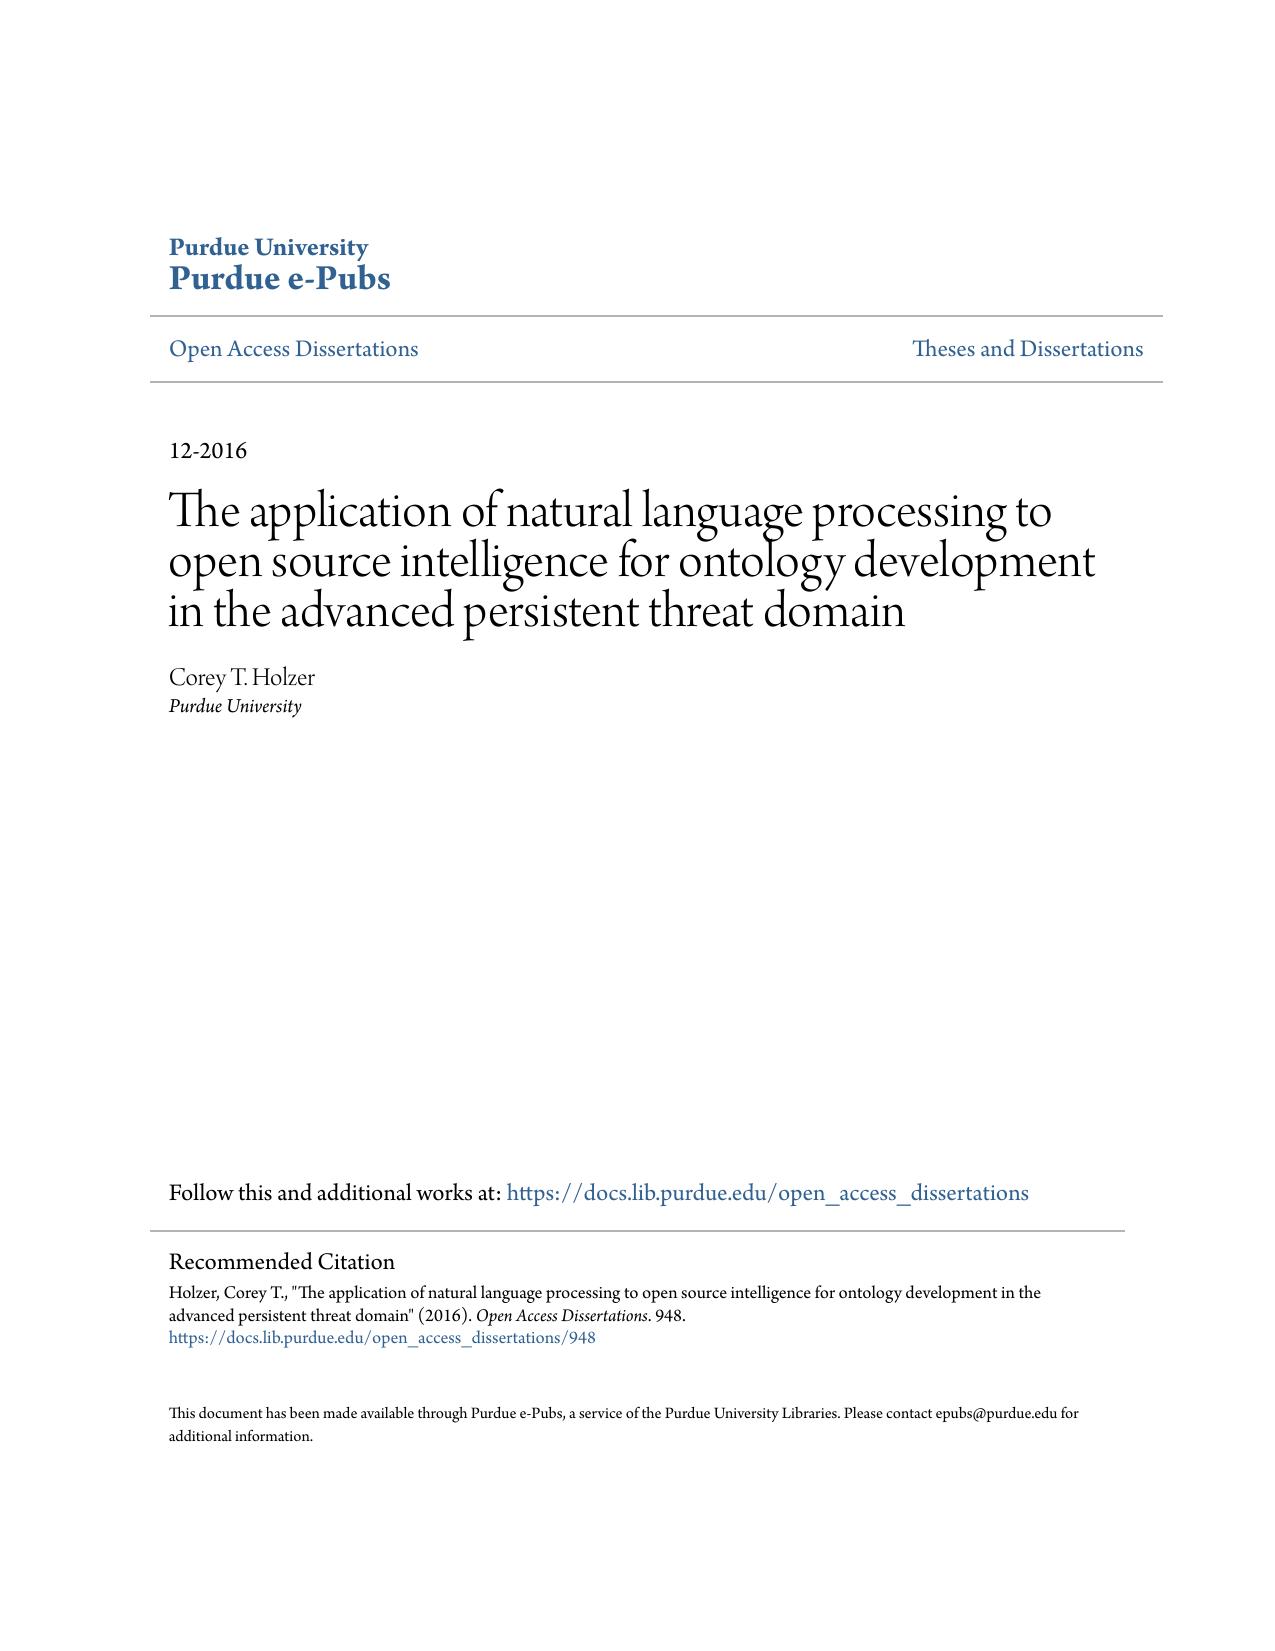 The application of natural language processing to open source intelligence for ontology development in the advanced persistent threat domain - Dissertation